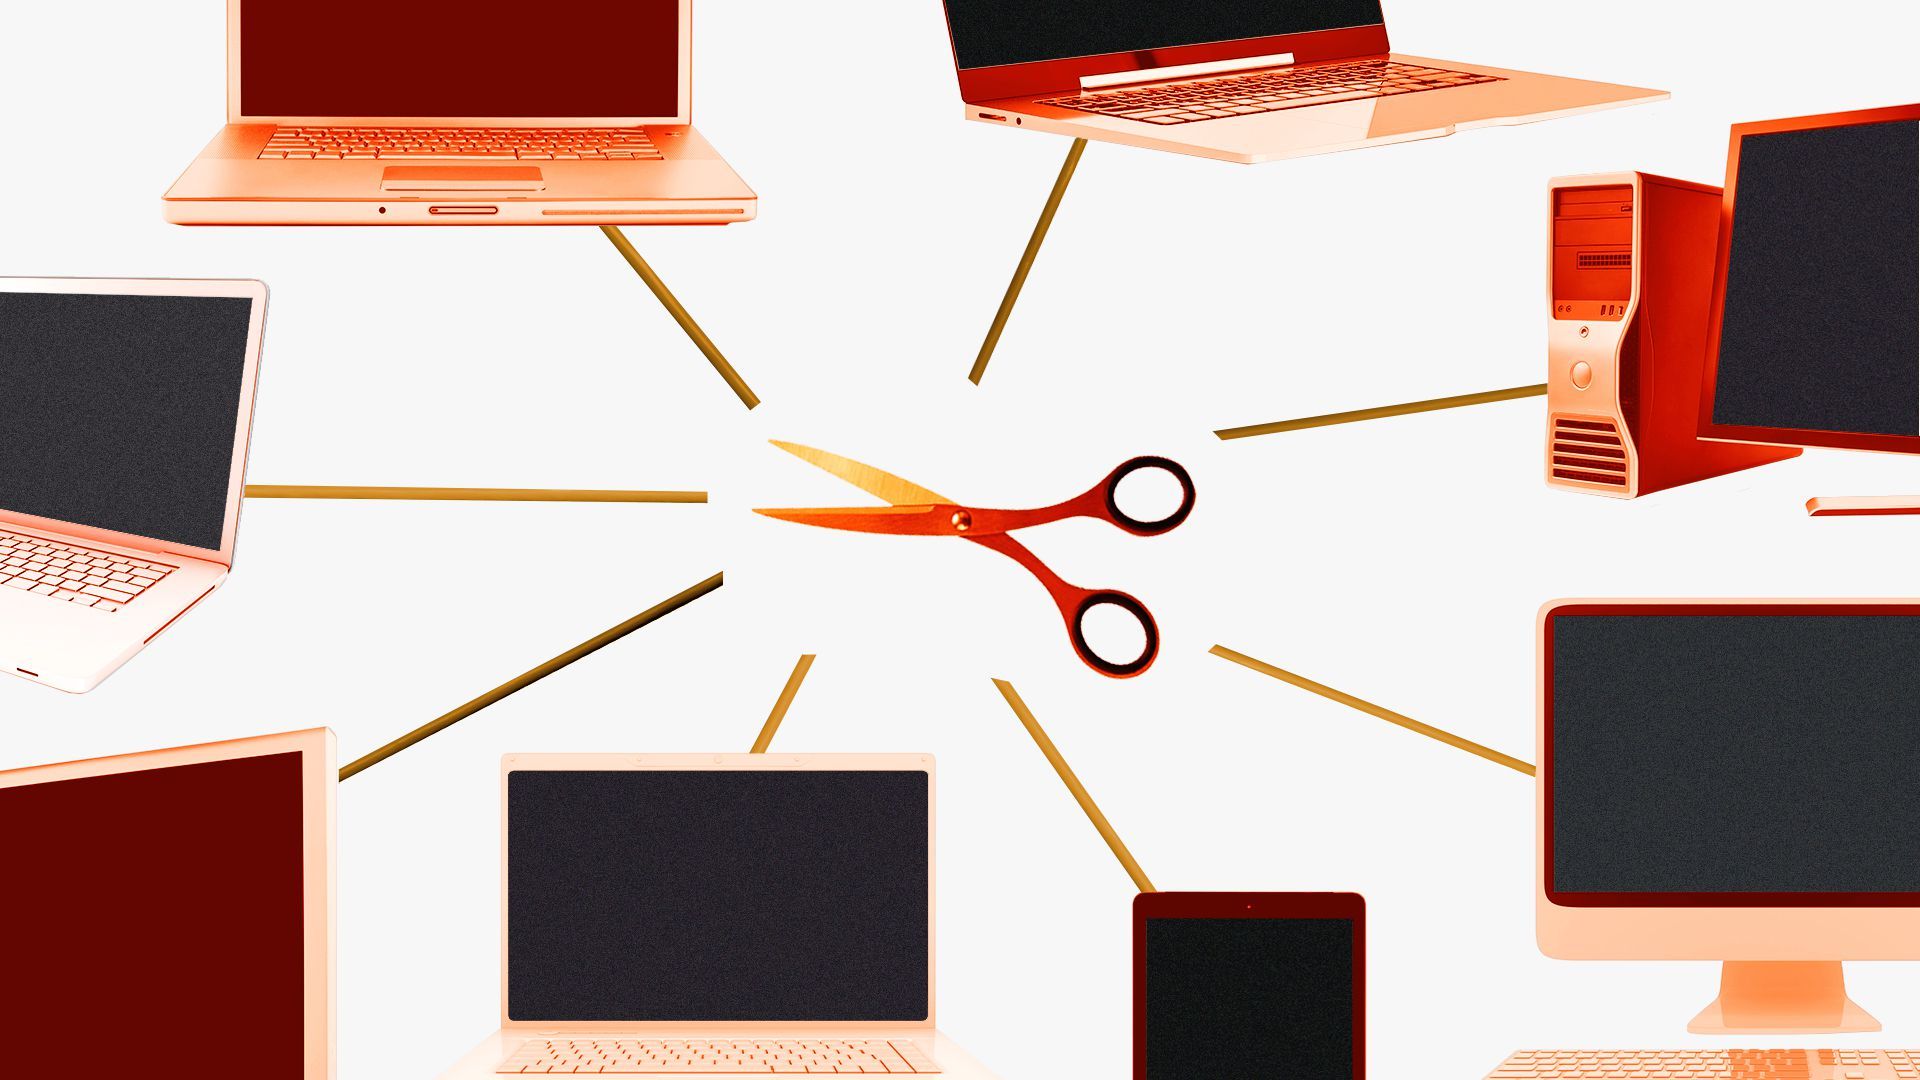 Illustration of scissors cutting cords connected to various computers